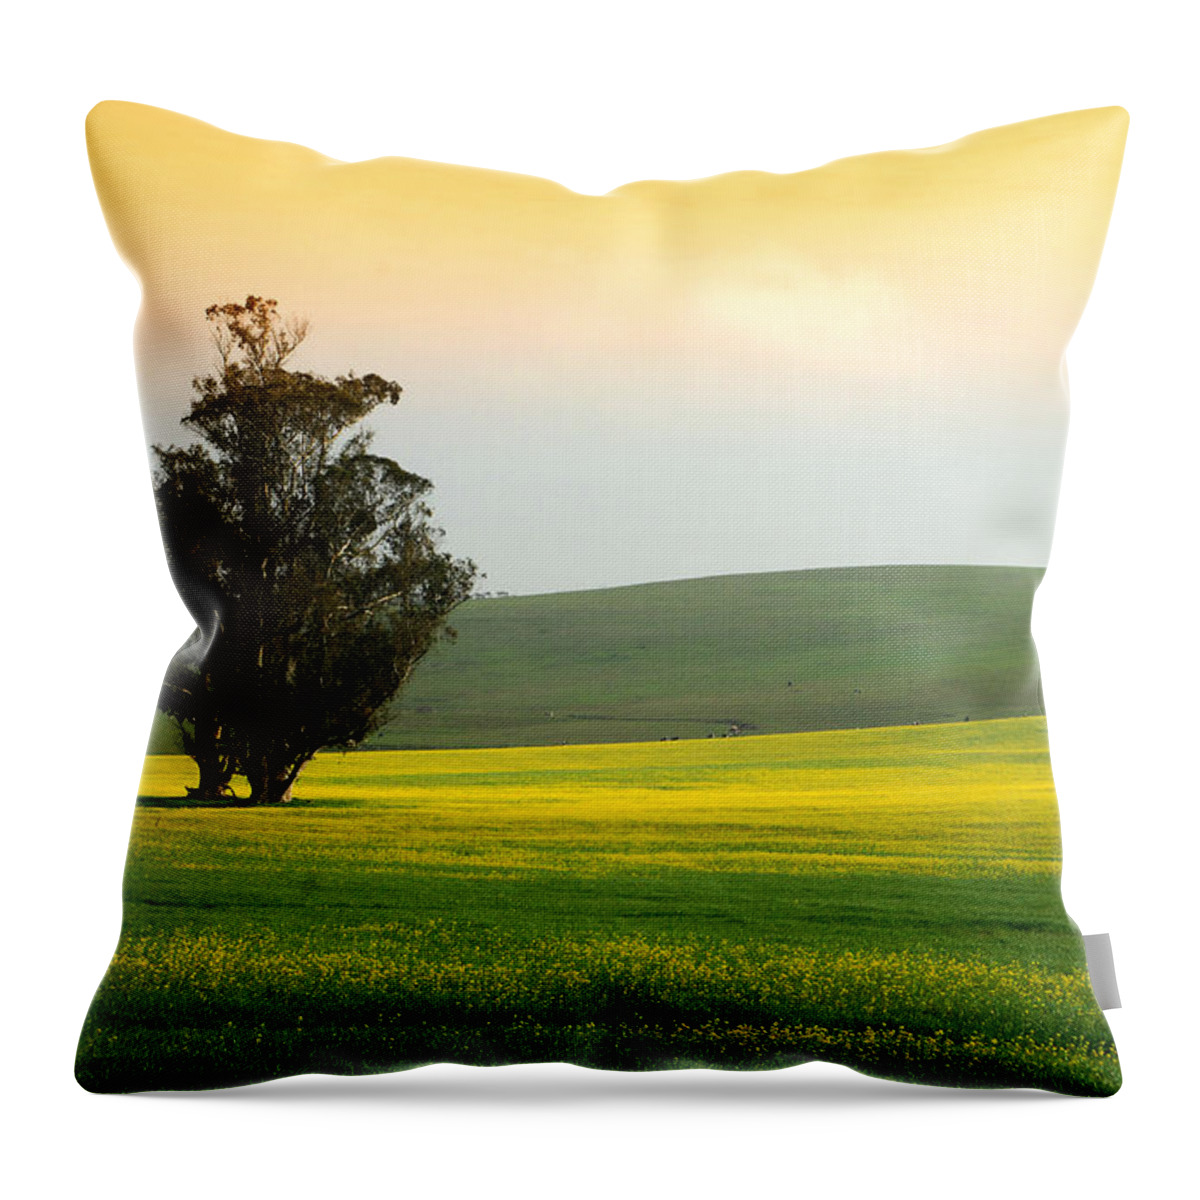 Mustard Flowers Throw Pillow featuring the photograph In Fields Of Gold by Donna Blackhall